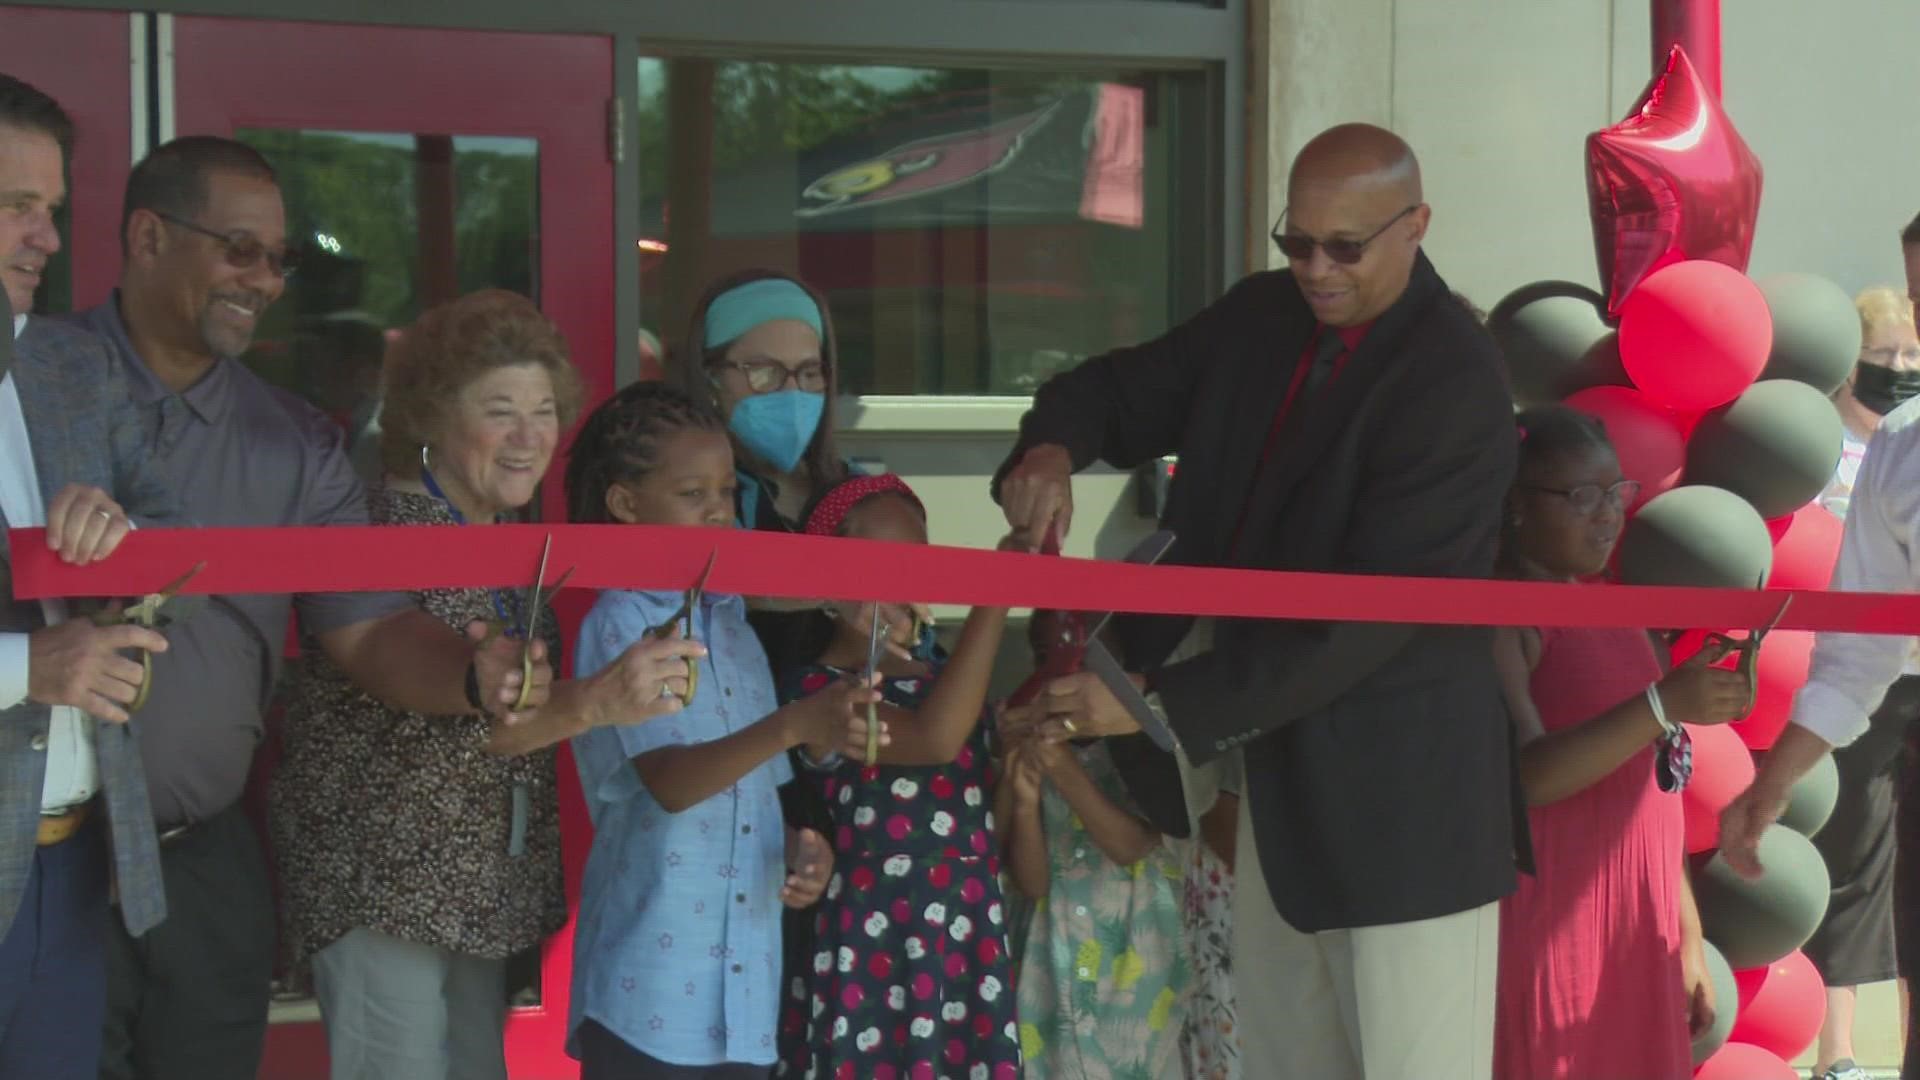 The project initially started in 2019. The $16.5 million school is set to open its doors for students Aug. 10 when school starts.